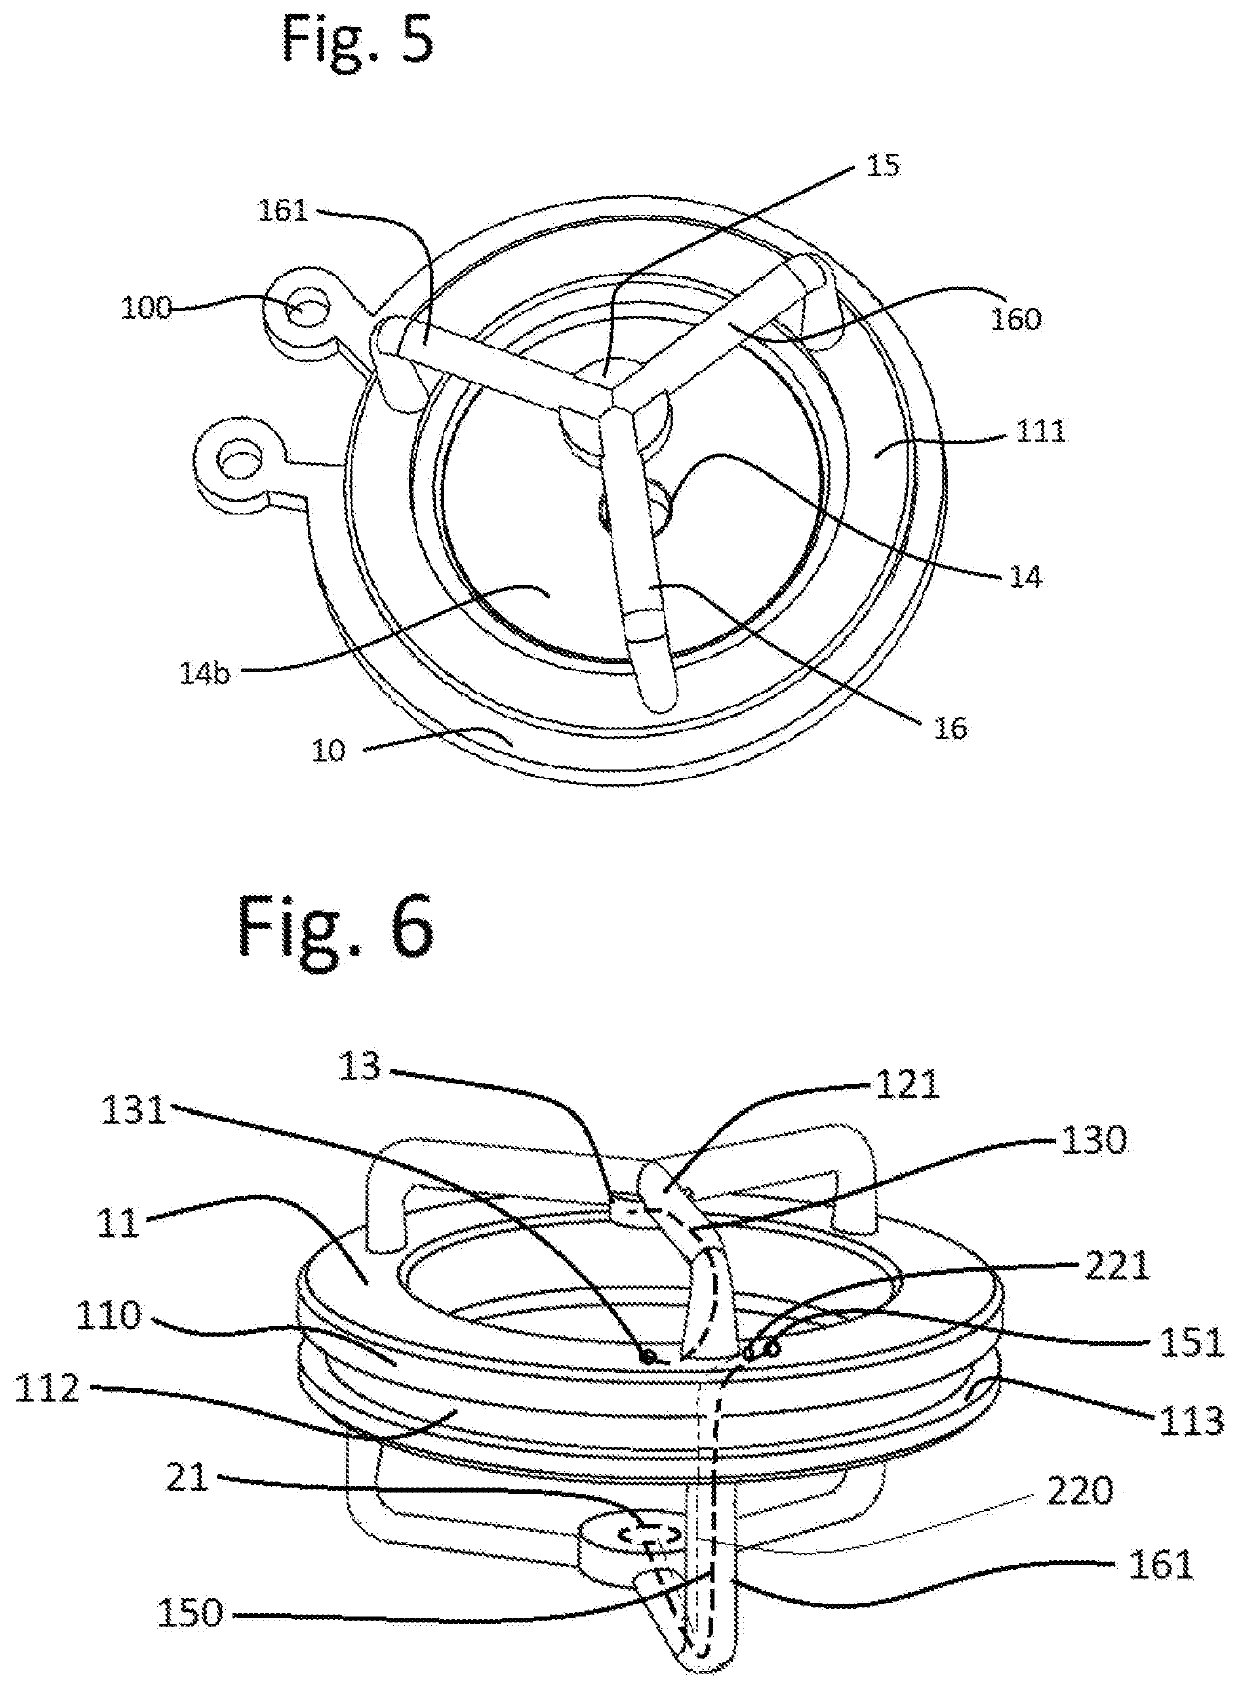 Single circular convex magnet leaflet disc with an opposing upper and lower magnetic field and electronic semiconductor sensor prosthetic heart valve that can communicate from the heart to the brain